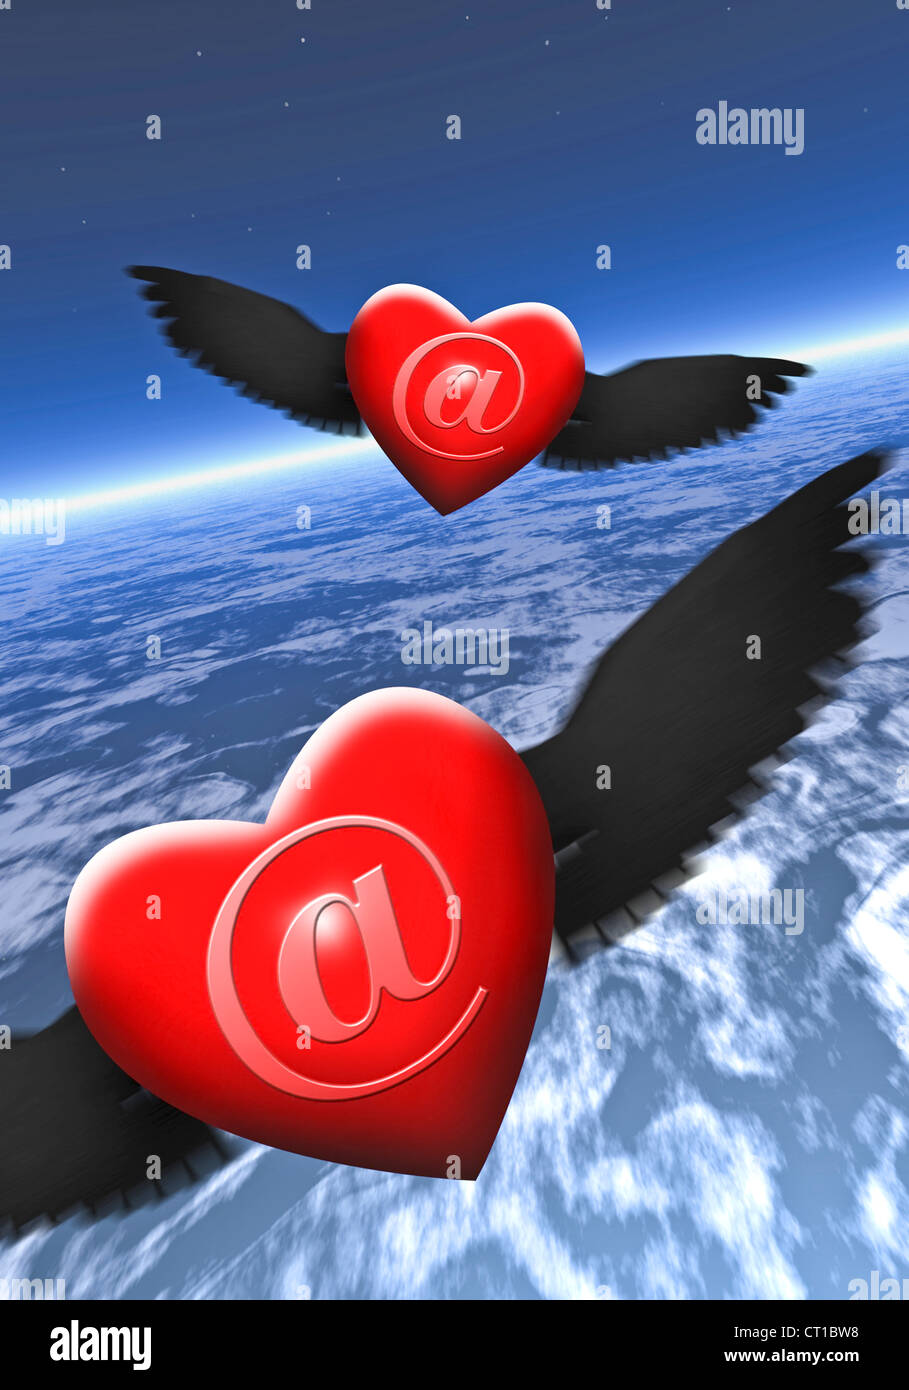 2 red hearts with black wings and an @ sign on them in the sky Stock Photo